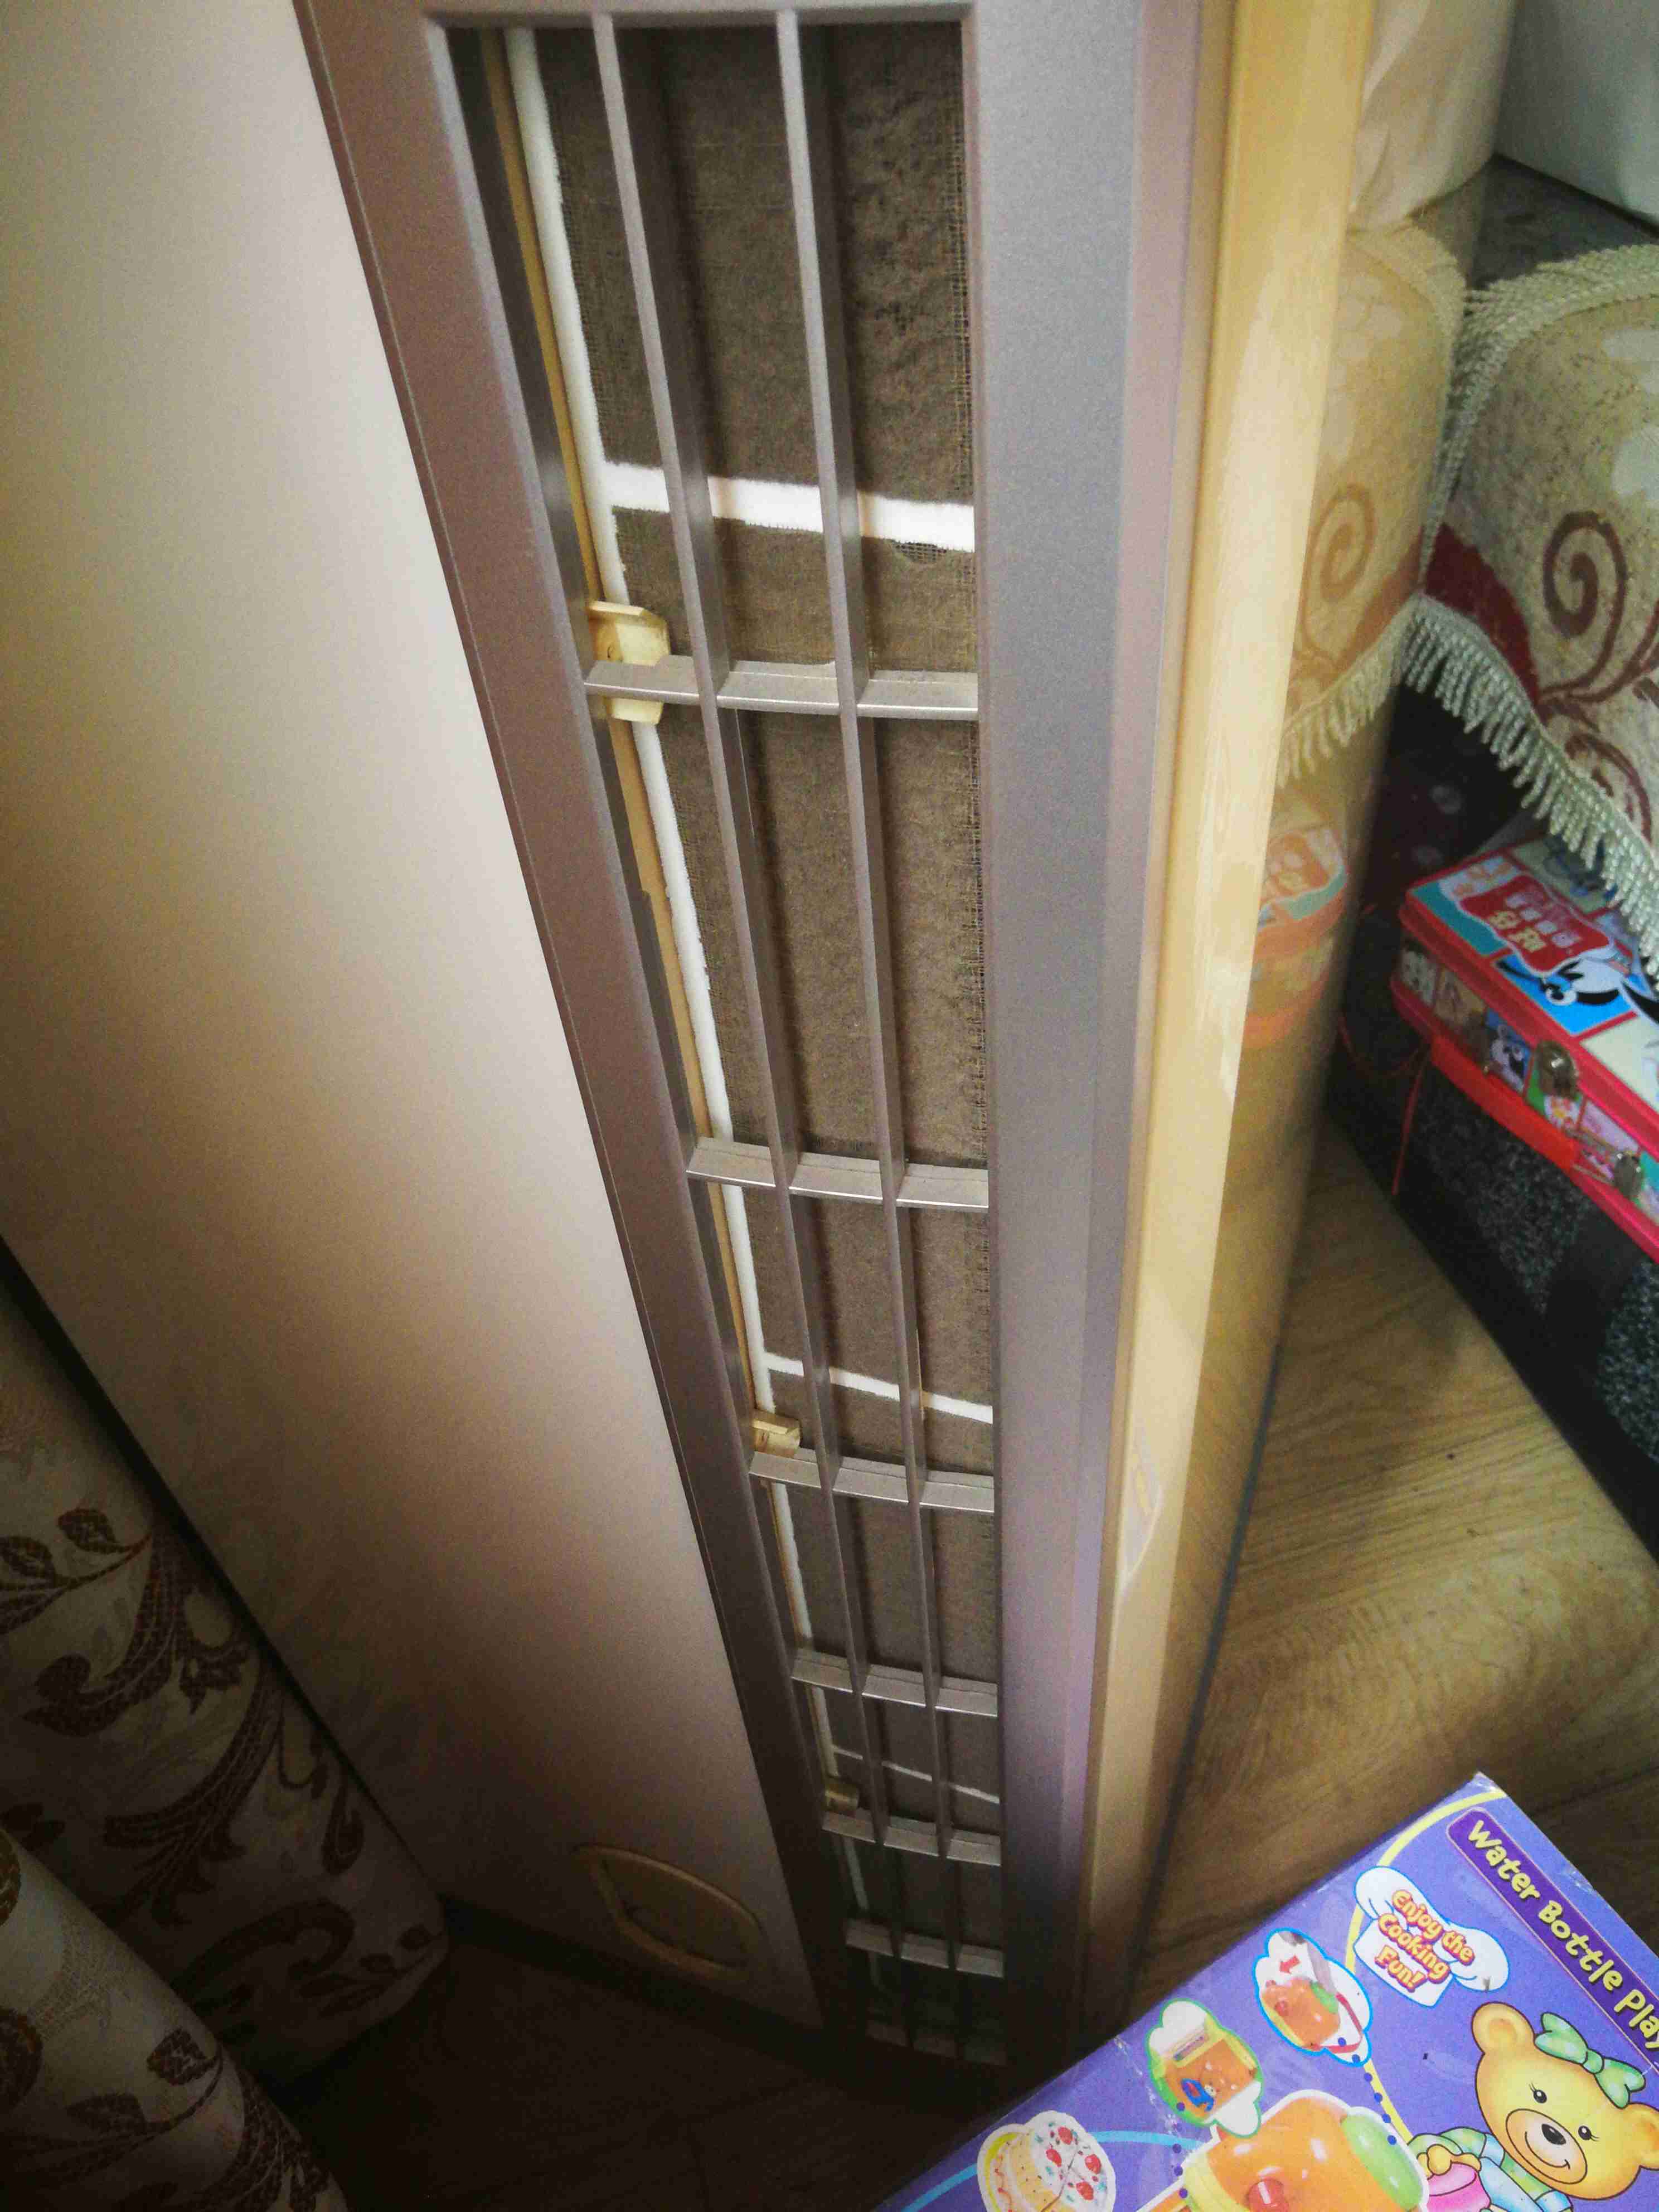  How to remove and clean the filter screen of Midea Air Conditioner KFR-72LW/DY-E2 (E2)